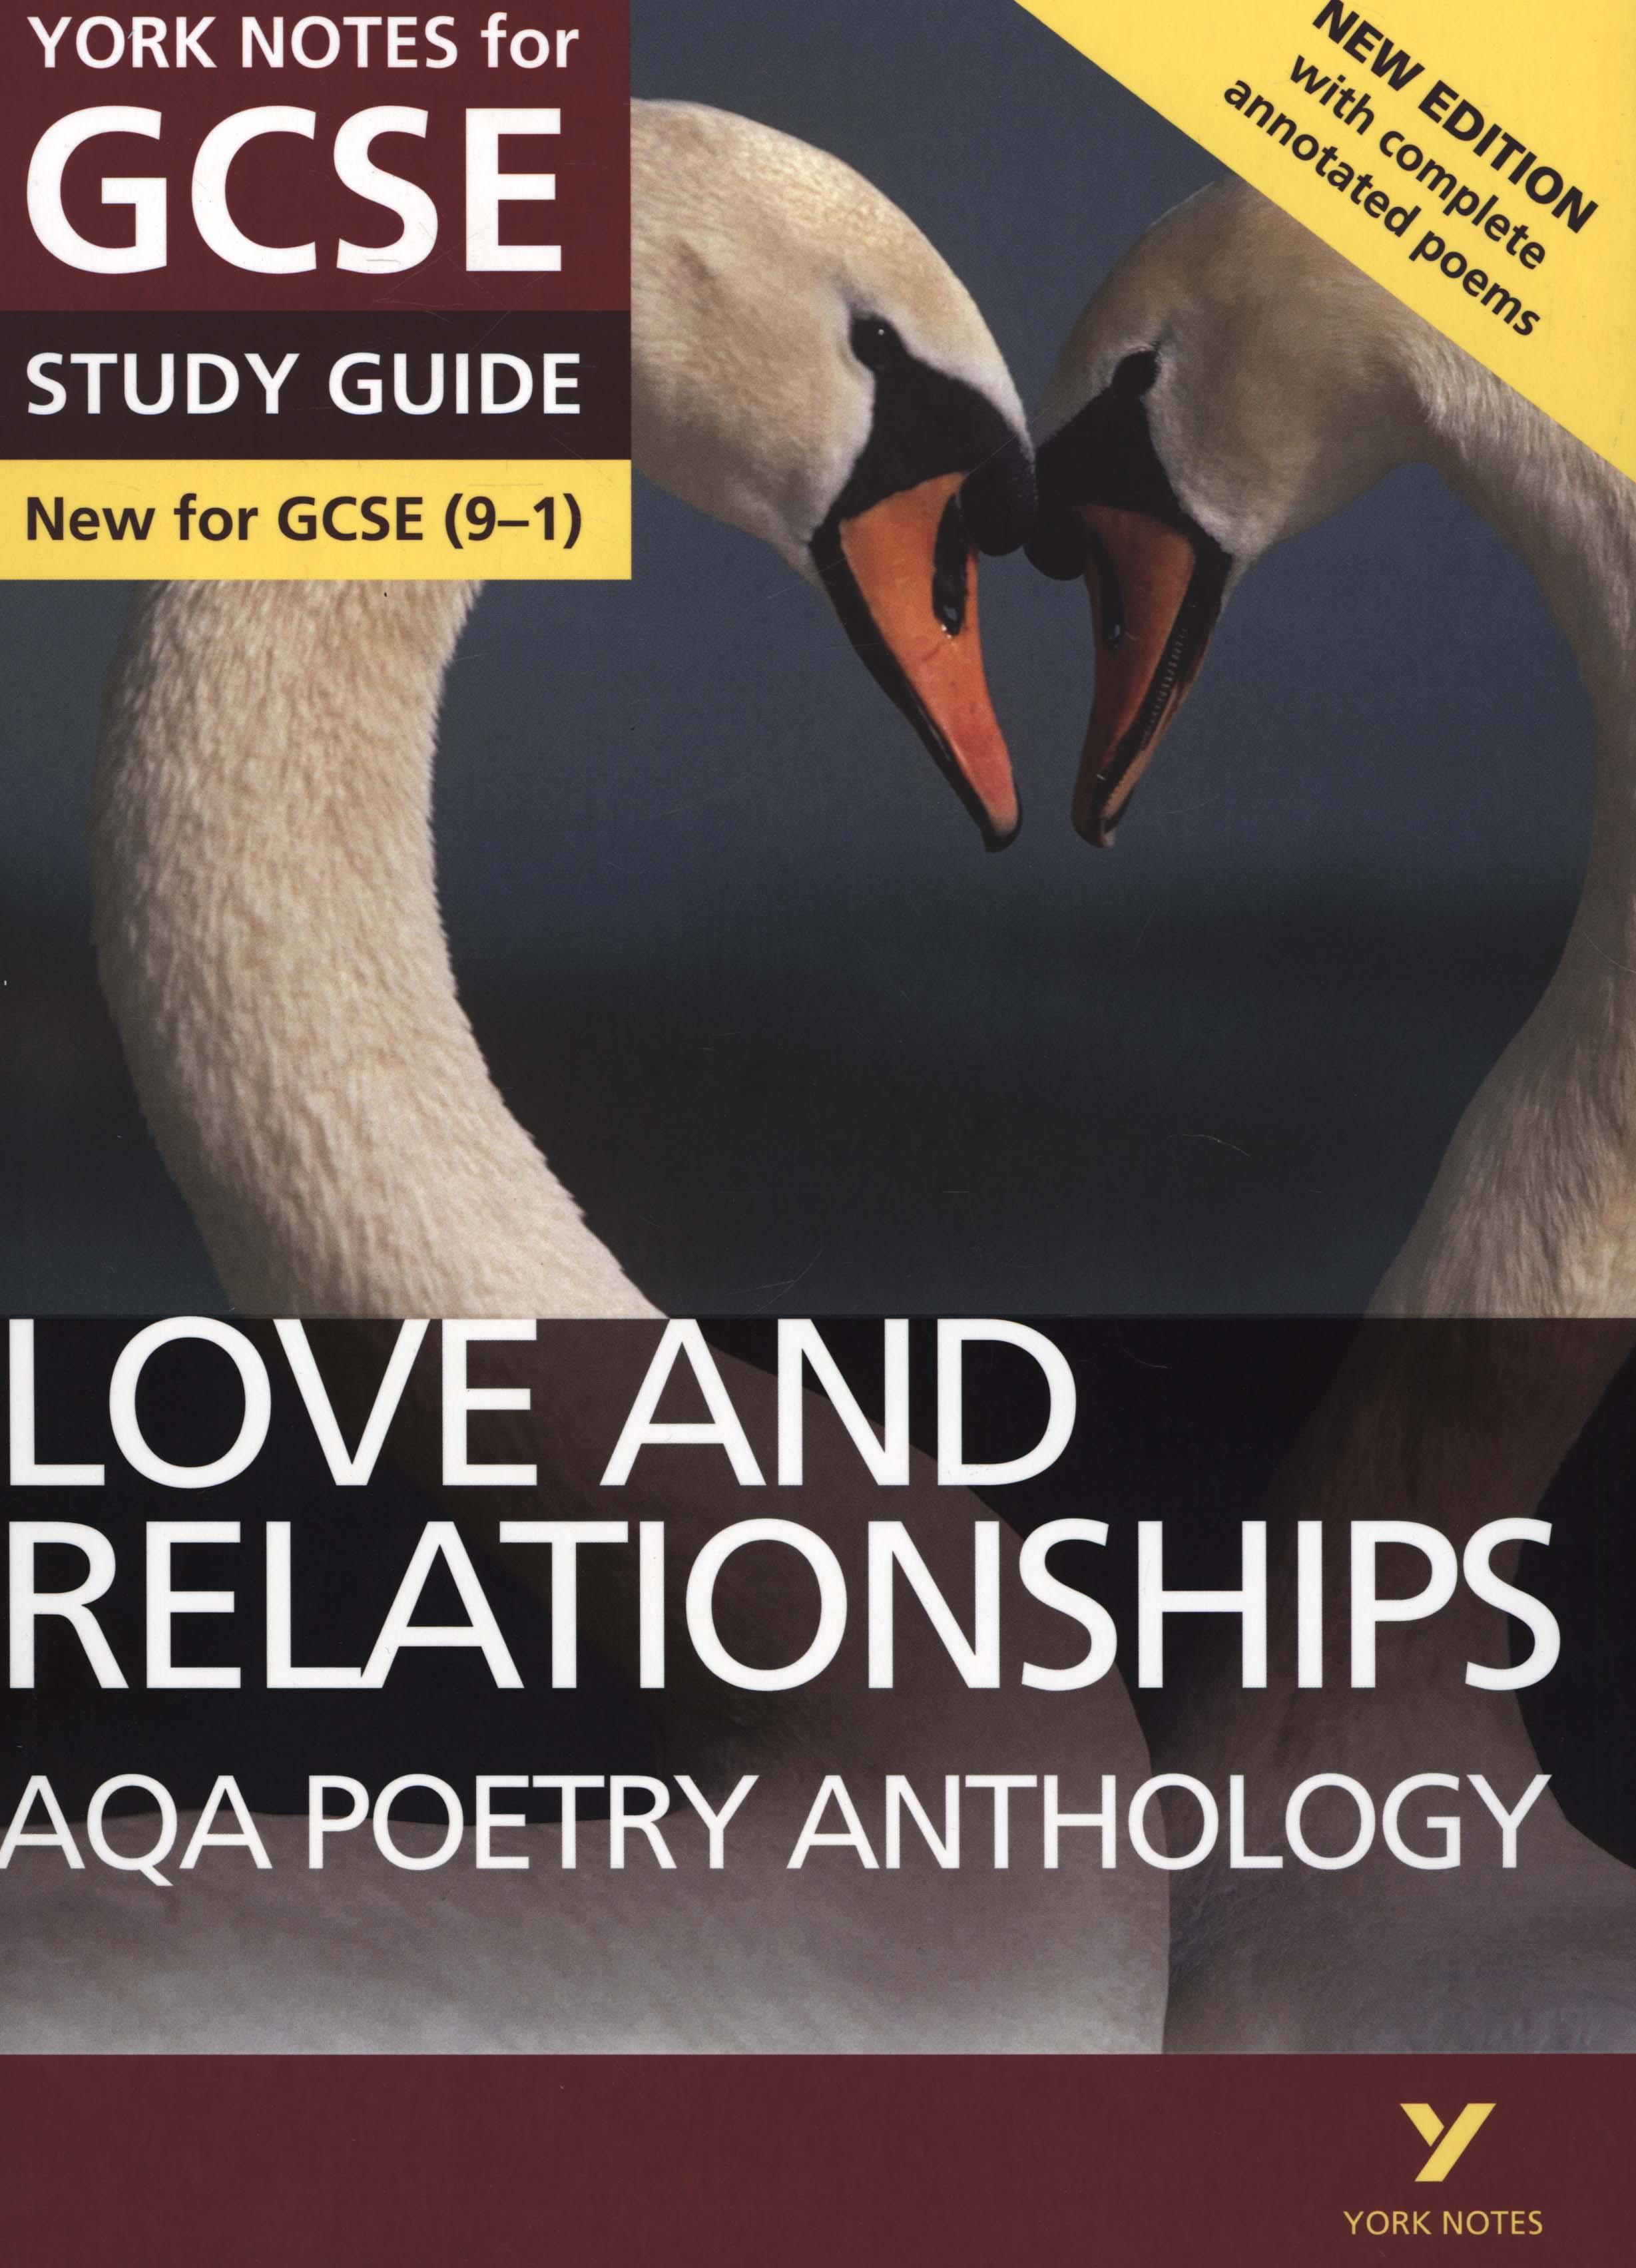 AQA Poetry Anthology - Love and Relationships: York Notes fo